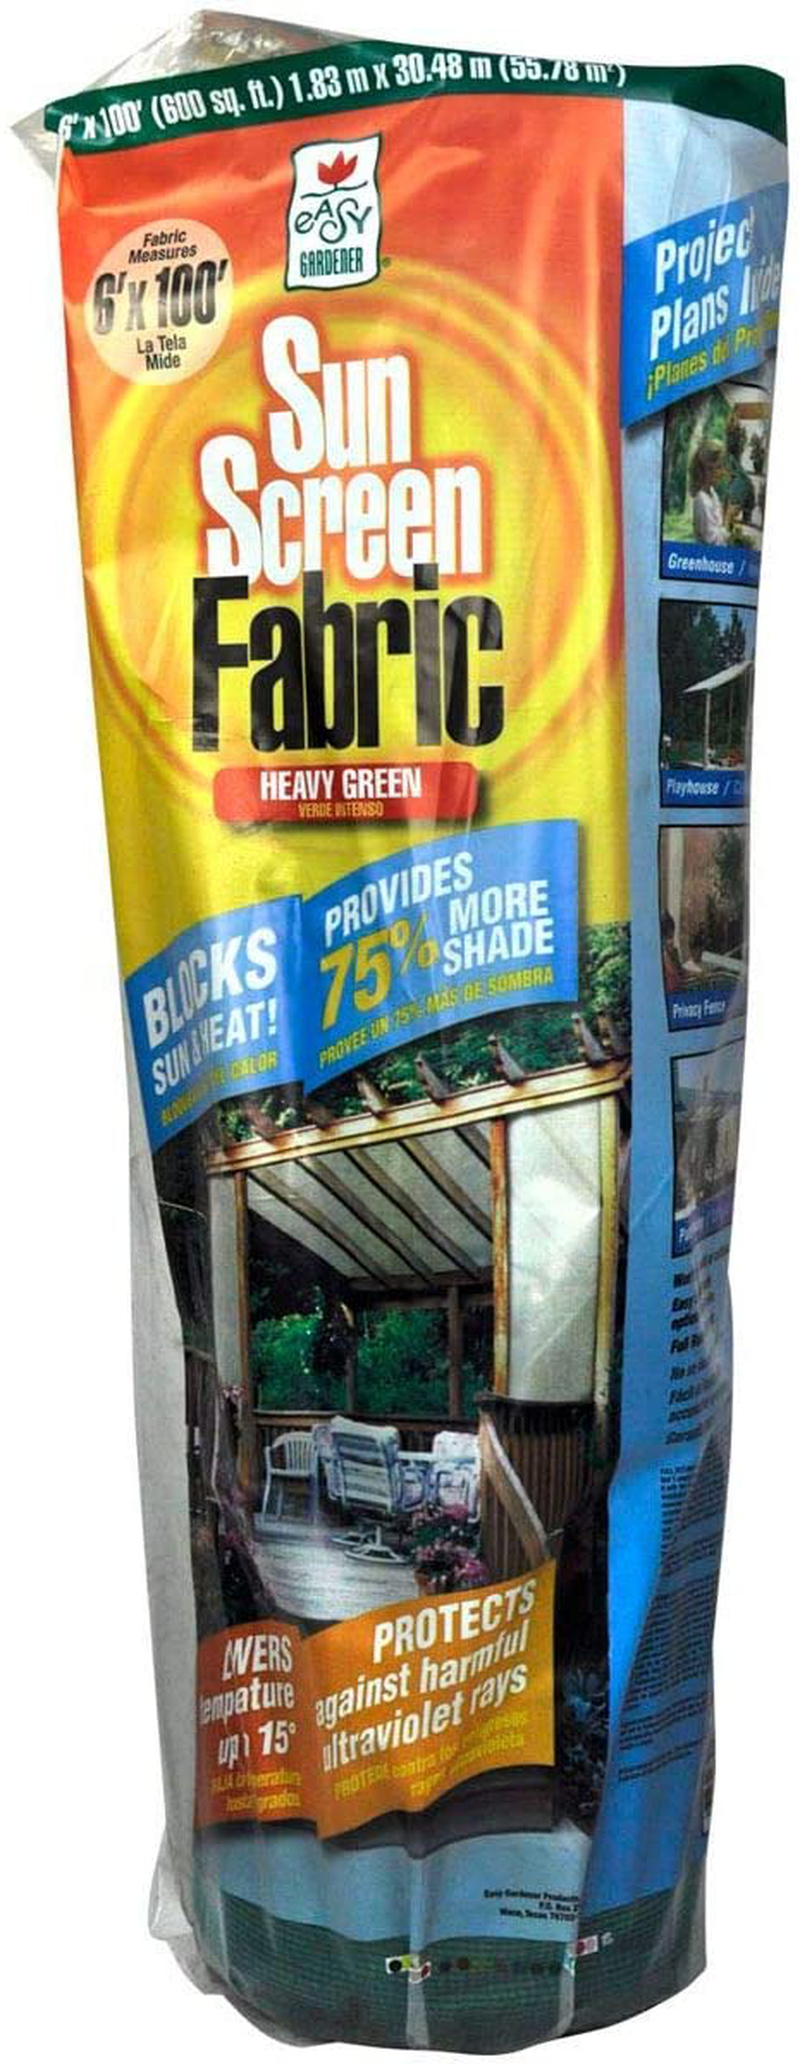 Easy Gardener 72020PS Sun Screen Fabric, 6ft X 20ft, 6 by 20'